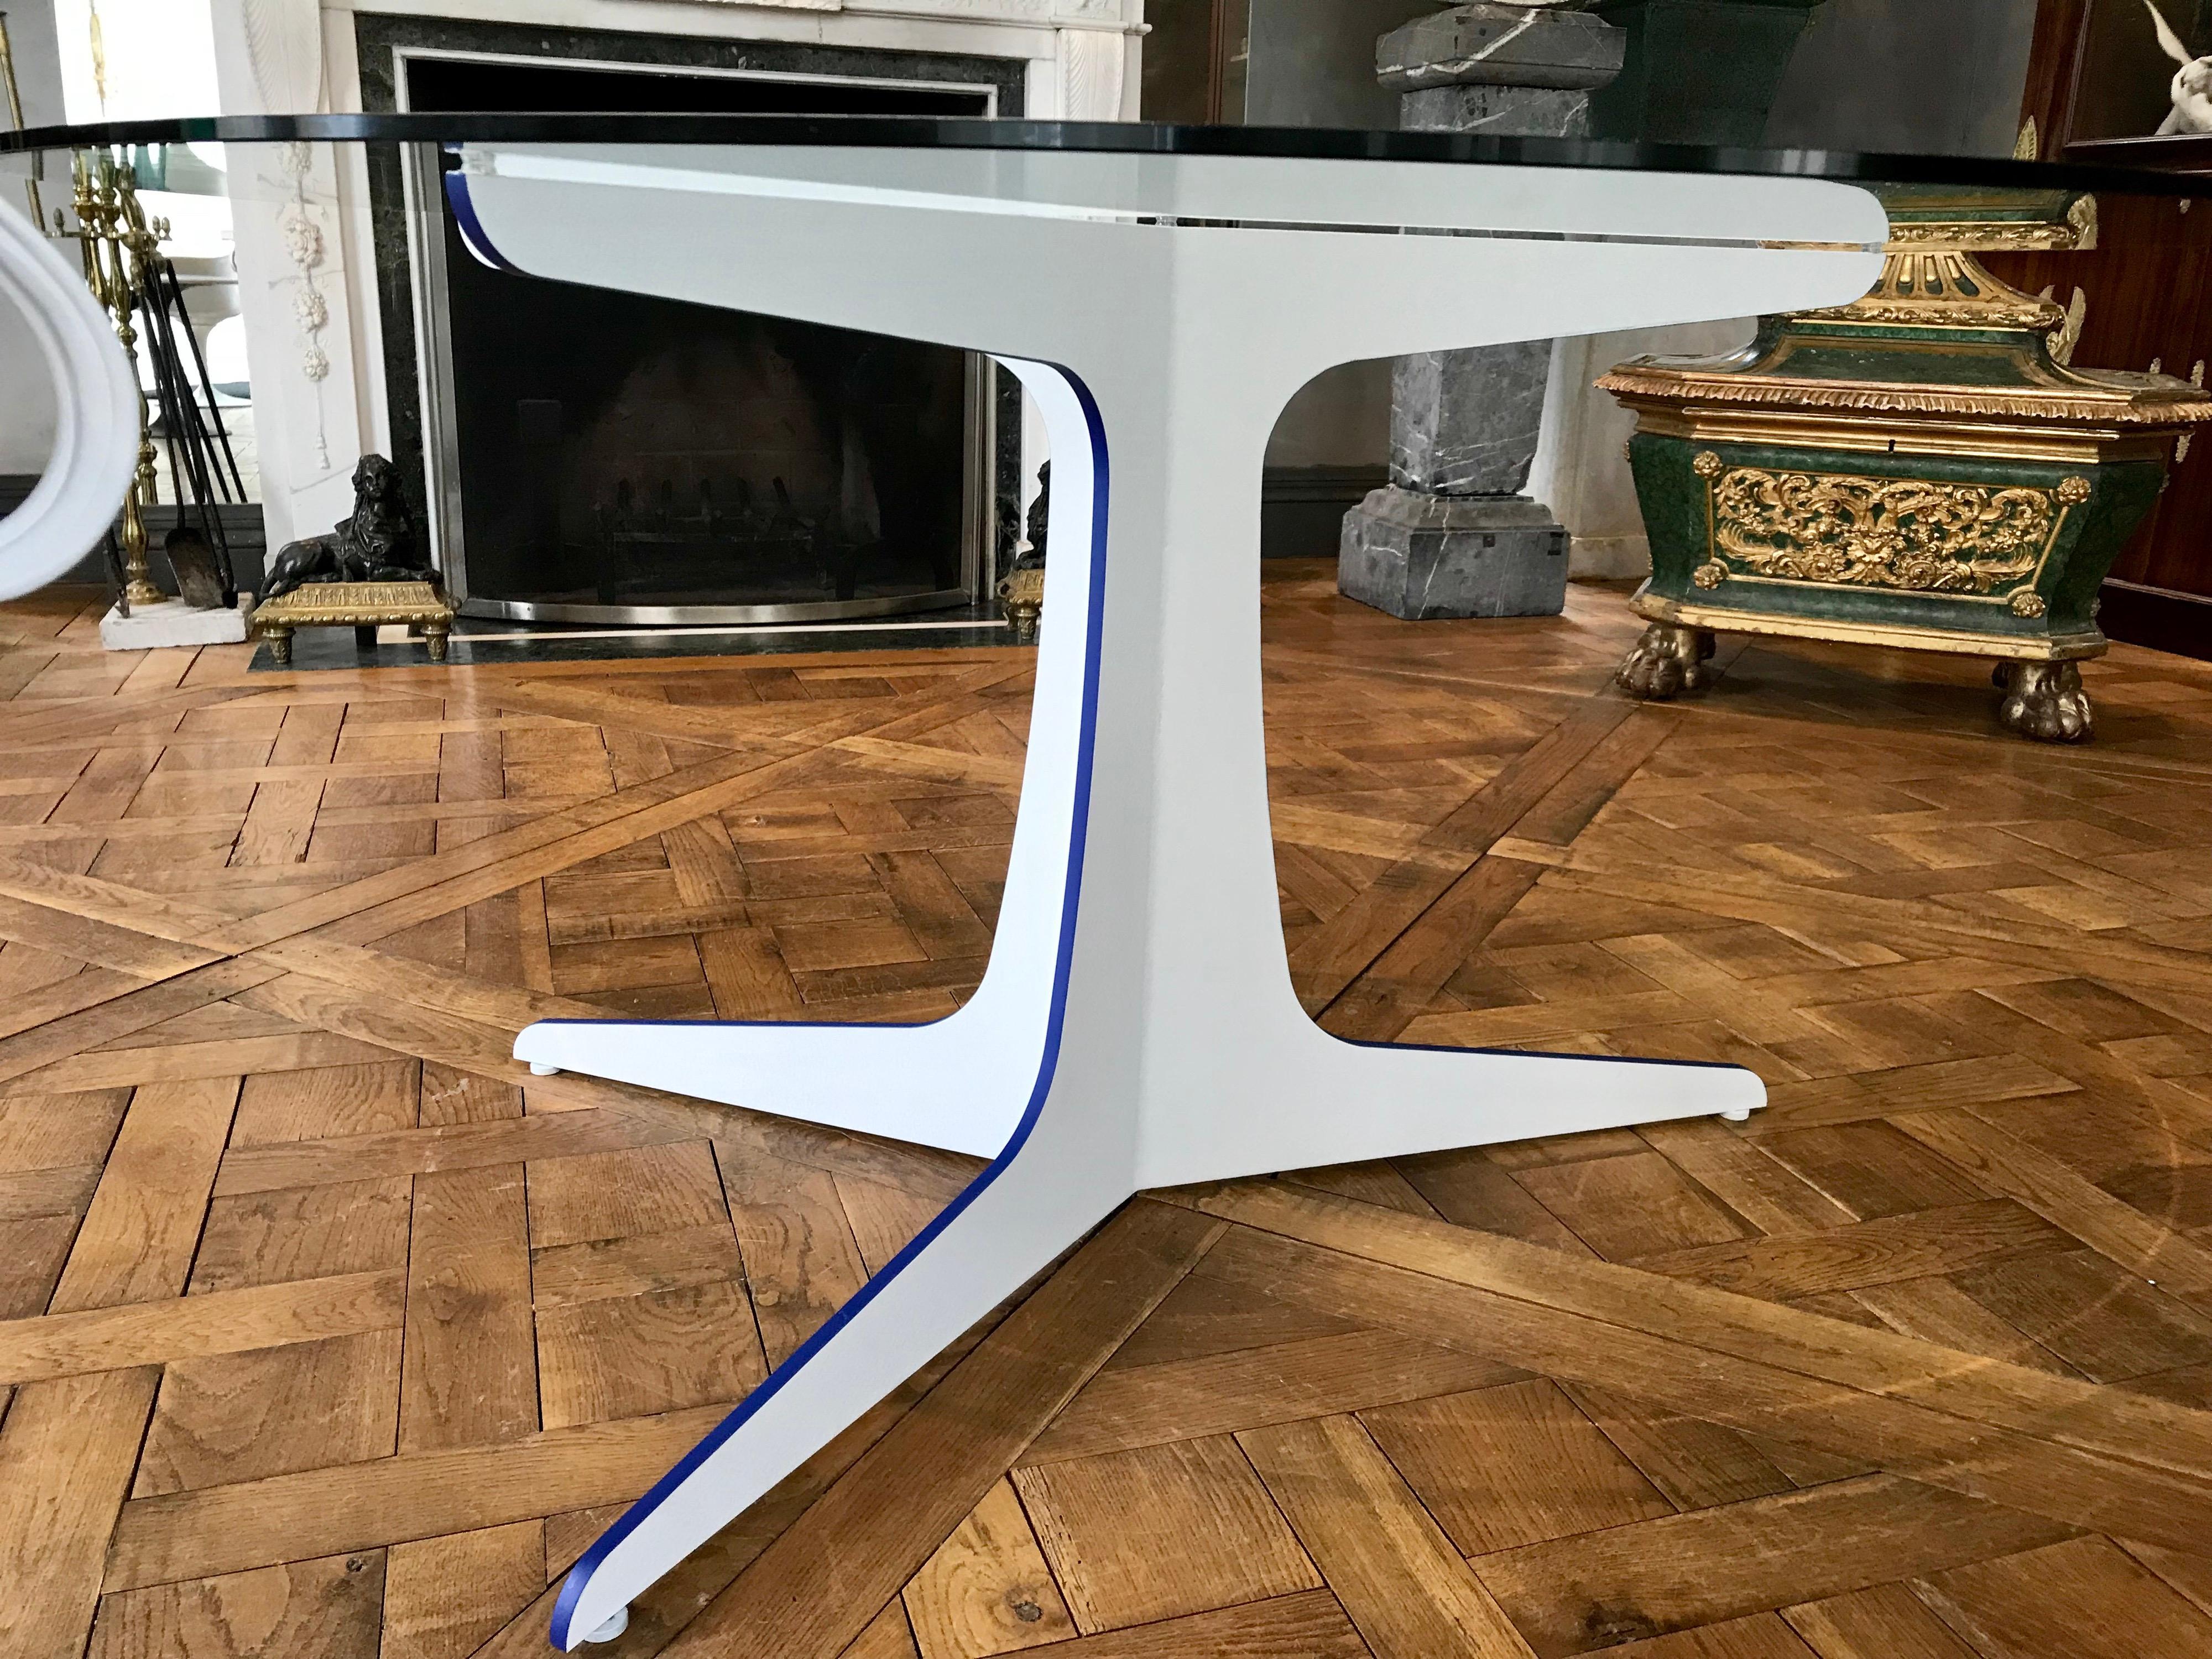 This unique 53” round modern glass top dining table has a three sided laser cut steel base shaped like a tree trunk.
It is powder coated in white and has striking azure blue accents on the edges.
The powder coating process makes it rust and damage